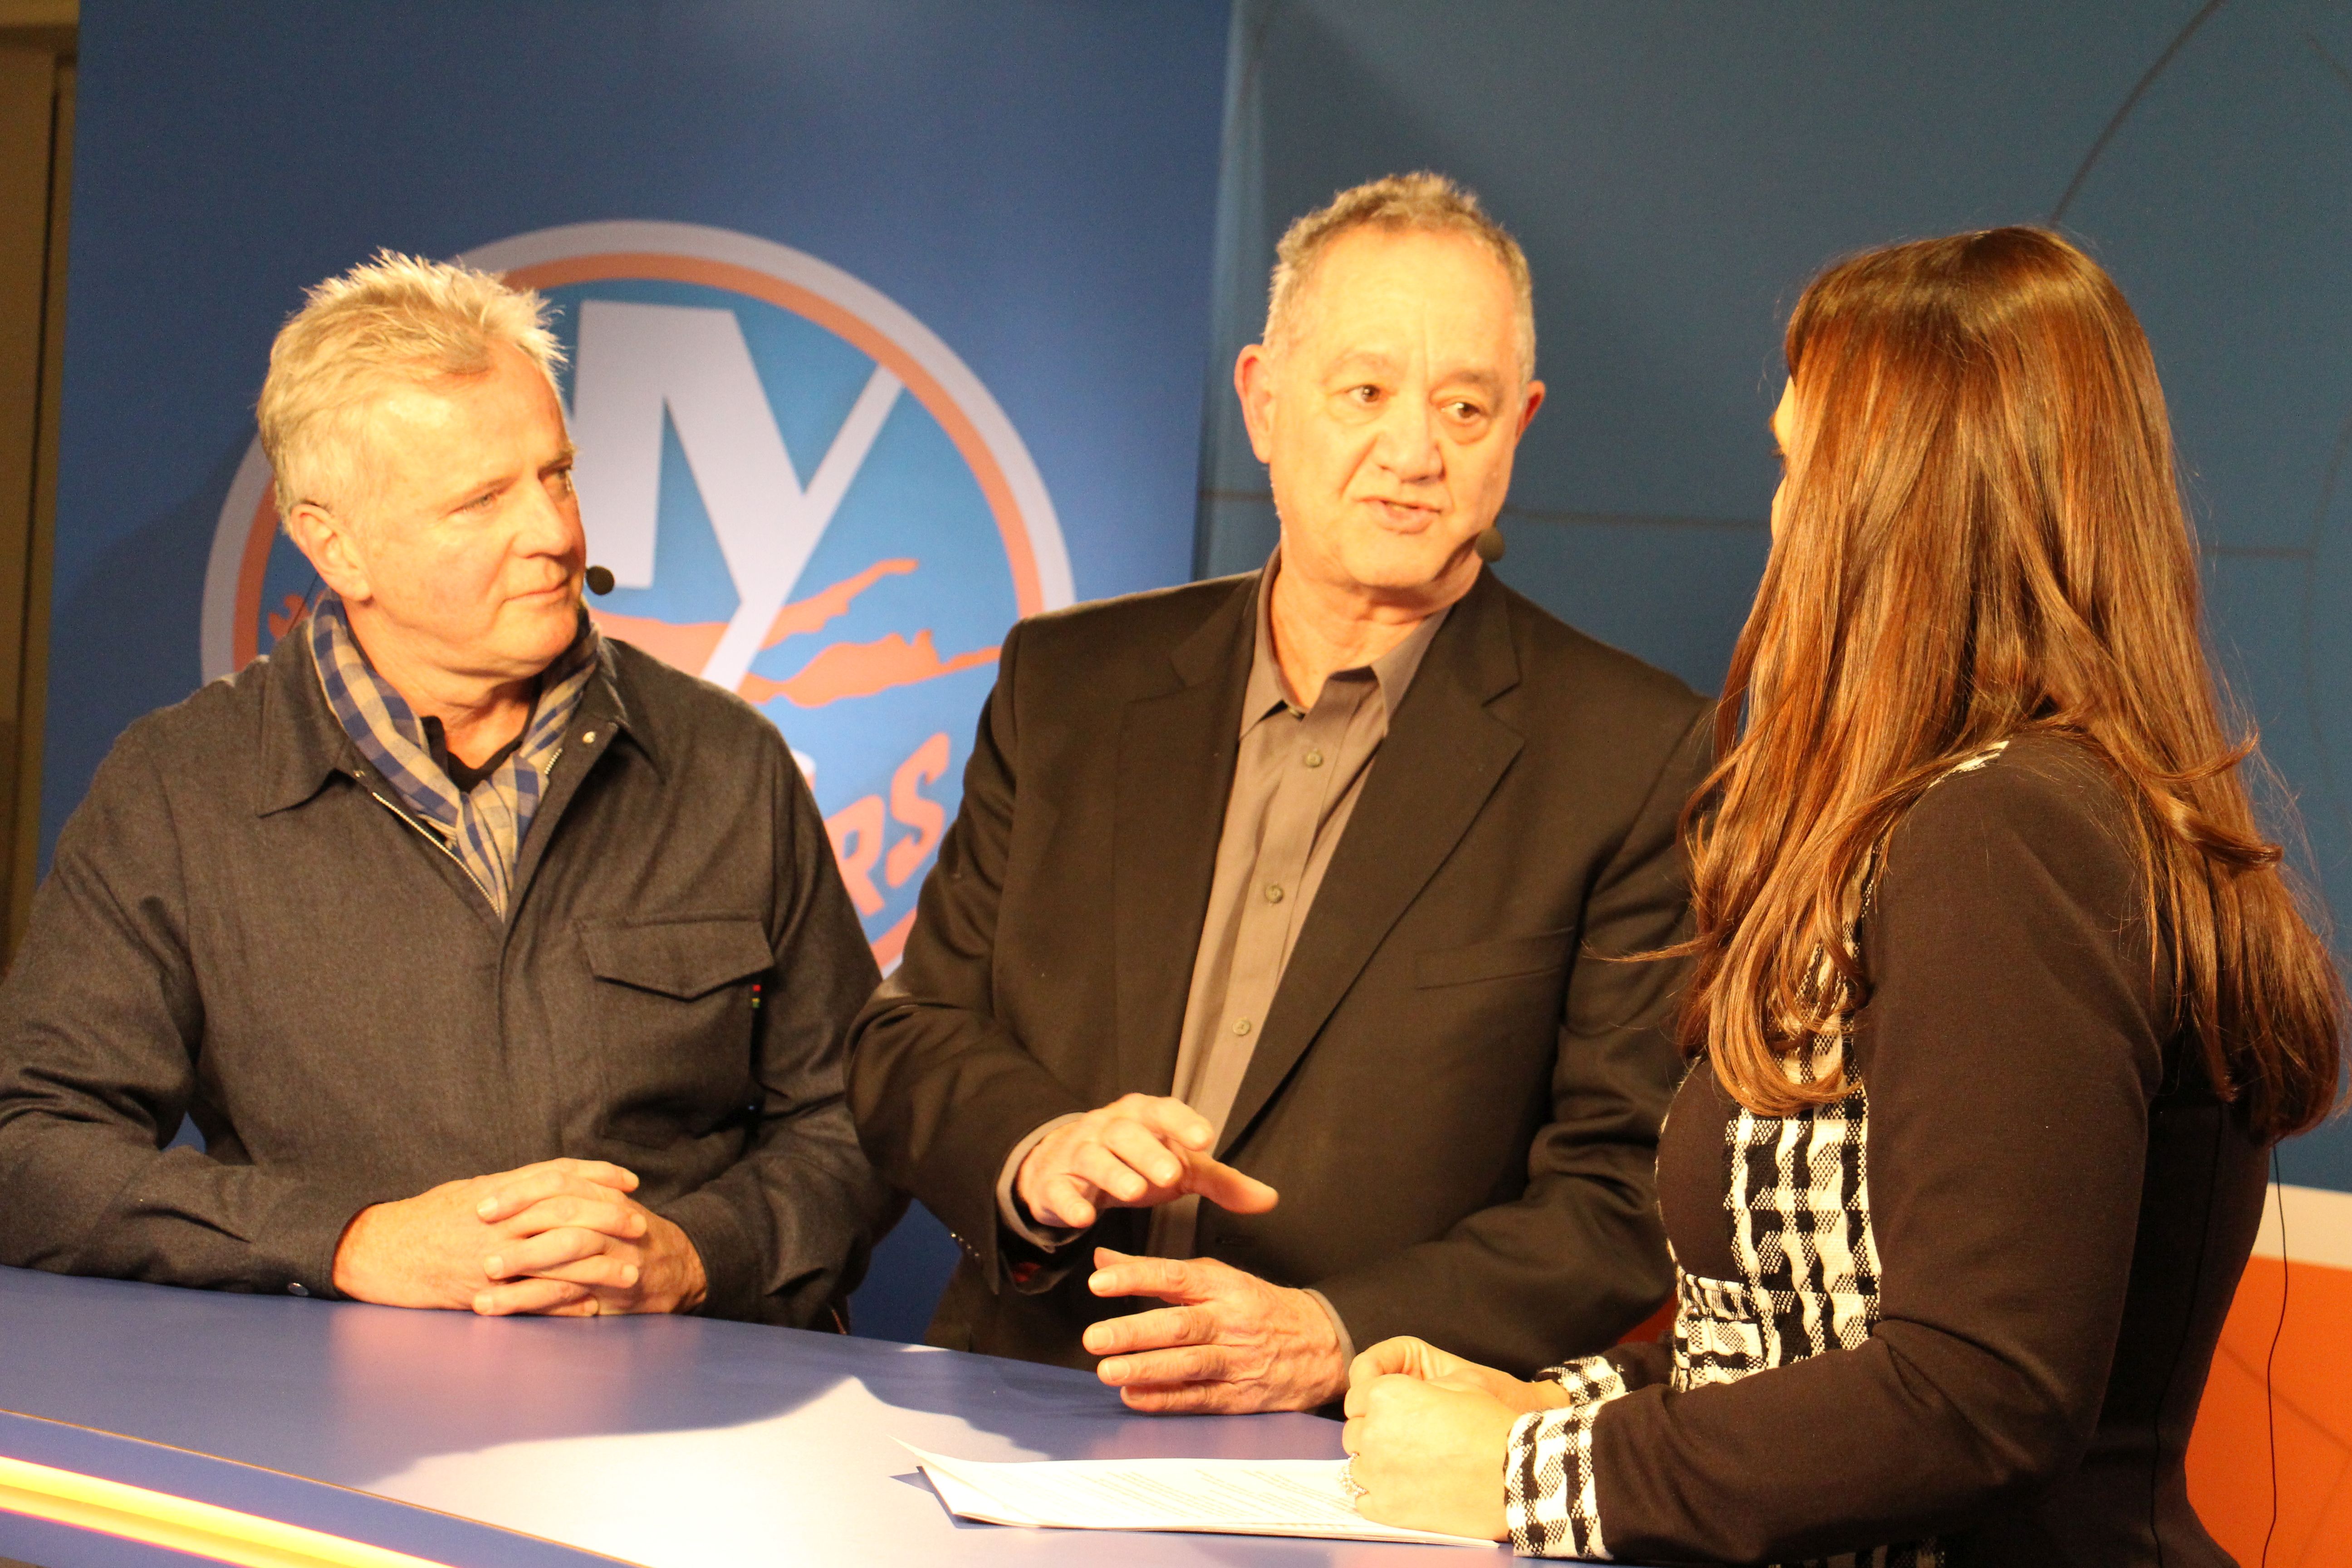 During the MSG+ pre-game show, Lon Dolber and Aidan Quinn shared their personal experiences with The Center for Discovery as a means of further illustrating its cause.